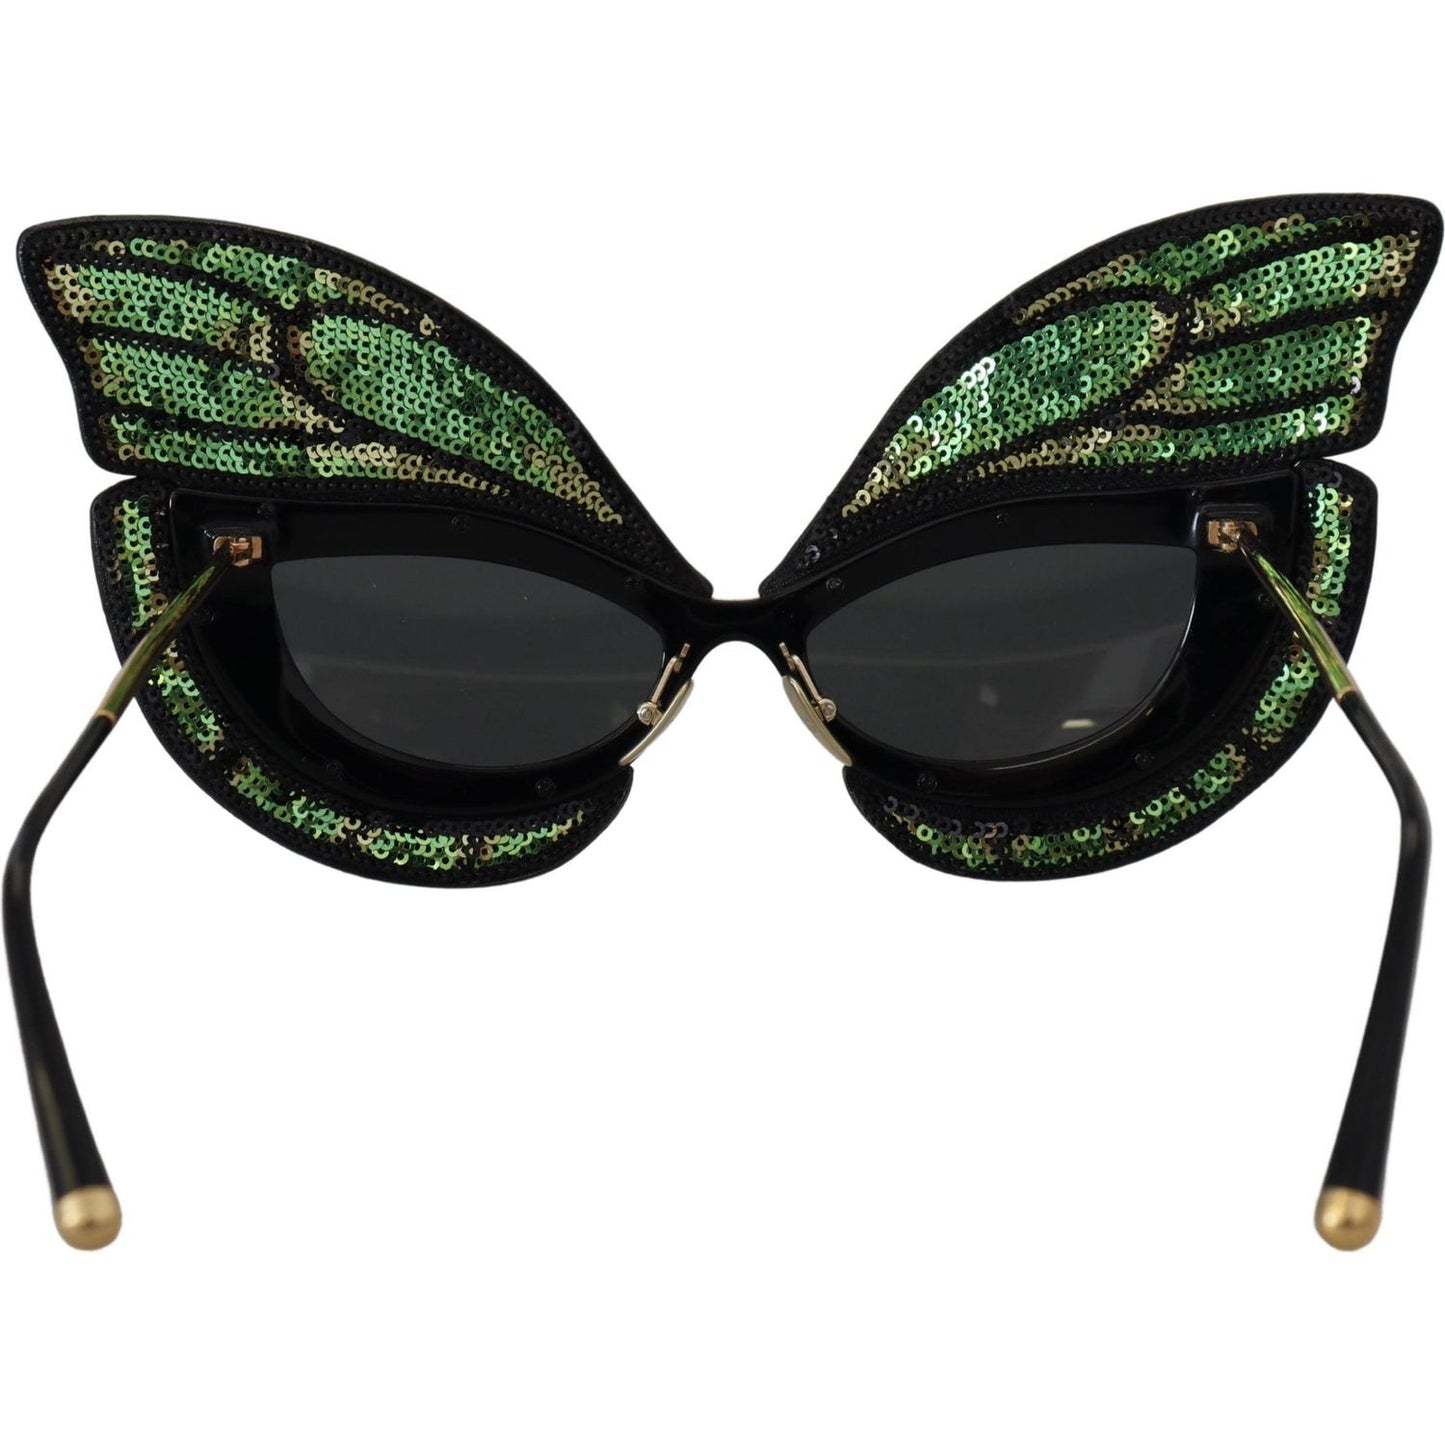 Dolce & Gabbana Exquisite Sequined Butterfly Sunglasses exquisite-sequined-butterfly-sunglasses IMG_4076-scaled-76e21174-e2b.jpg